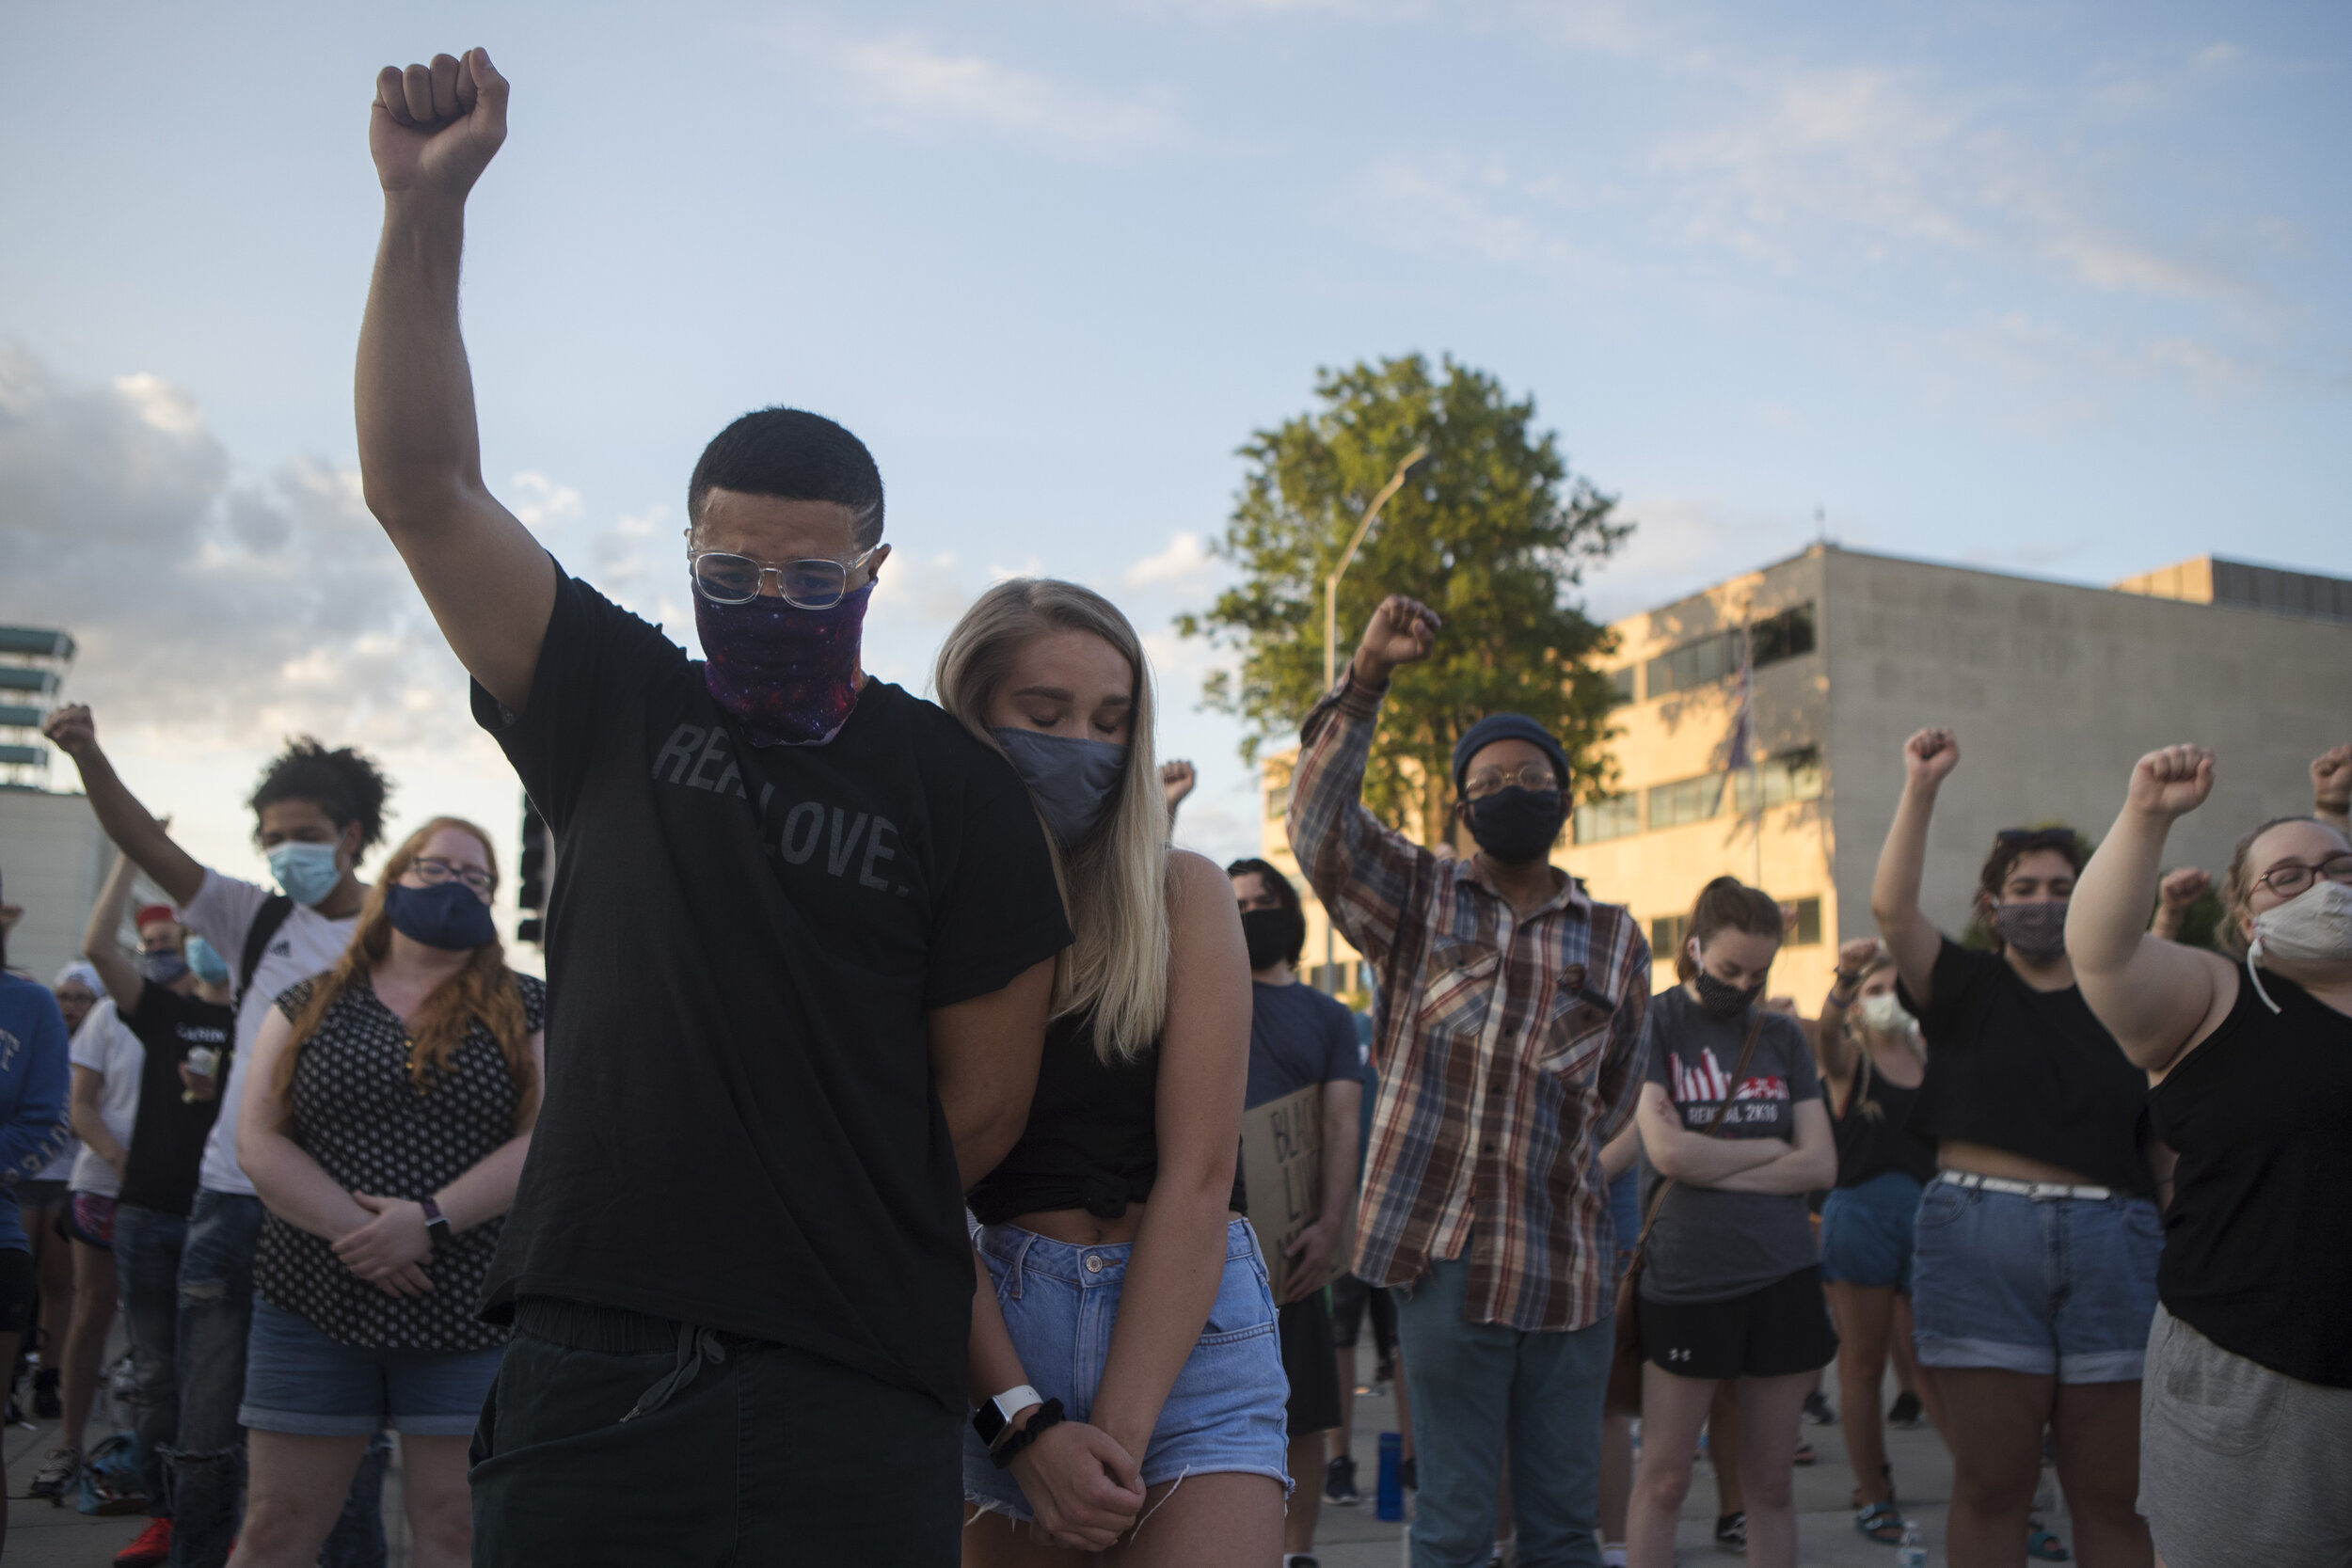  Demetrius Alexander (left) throws up his fist as Taylor Morris leans on him as the crowd sings Amazing Grace during a candlelight vigil remembering those lost on Friday, June 05, 2020, in Lincoln, Nebraska. KENNETH FERRIERA, Journal Star.  